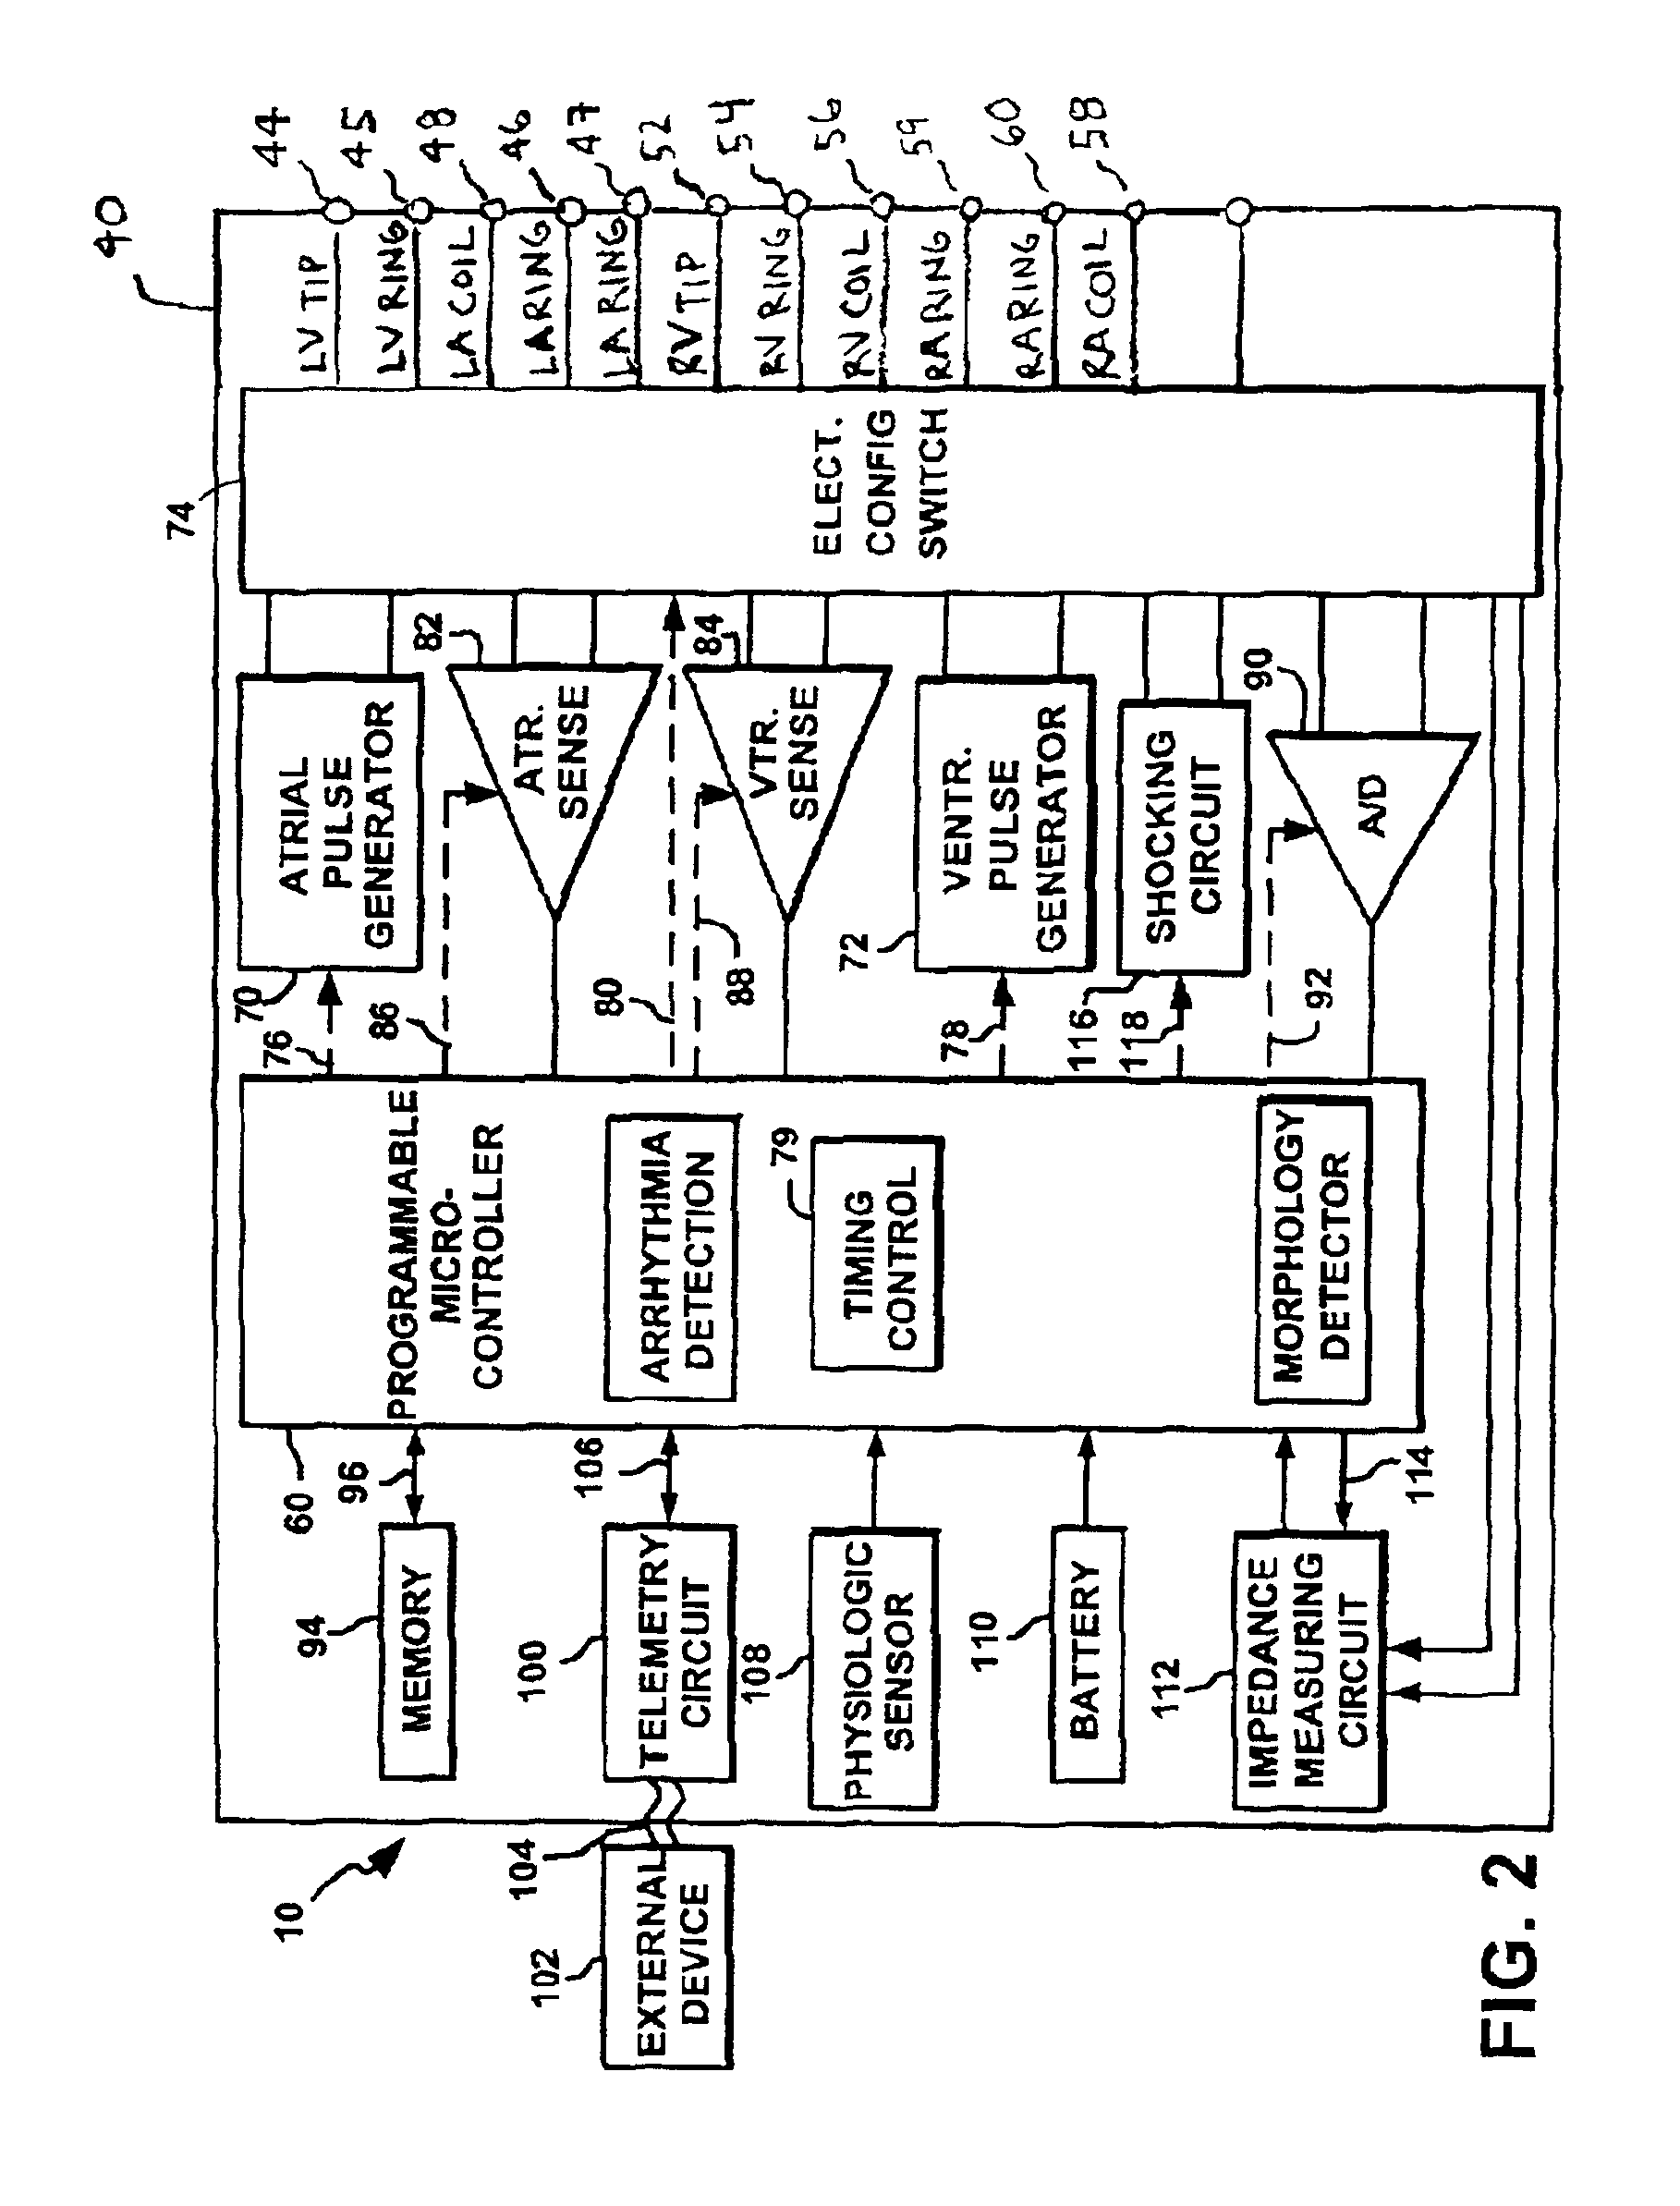 Anti-tachycardia pacing methods and devices